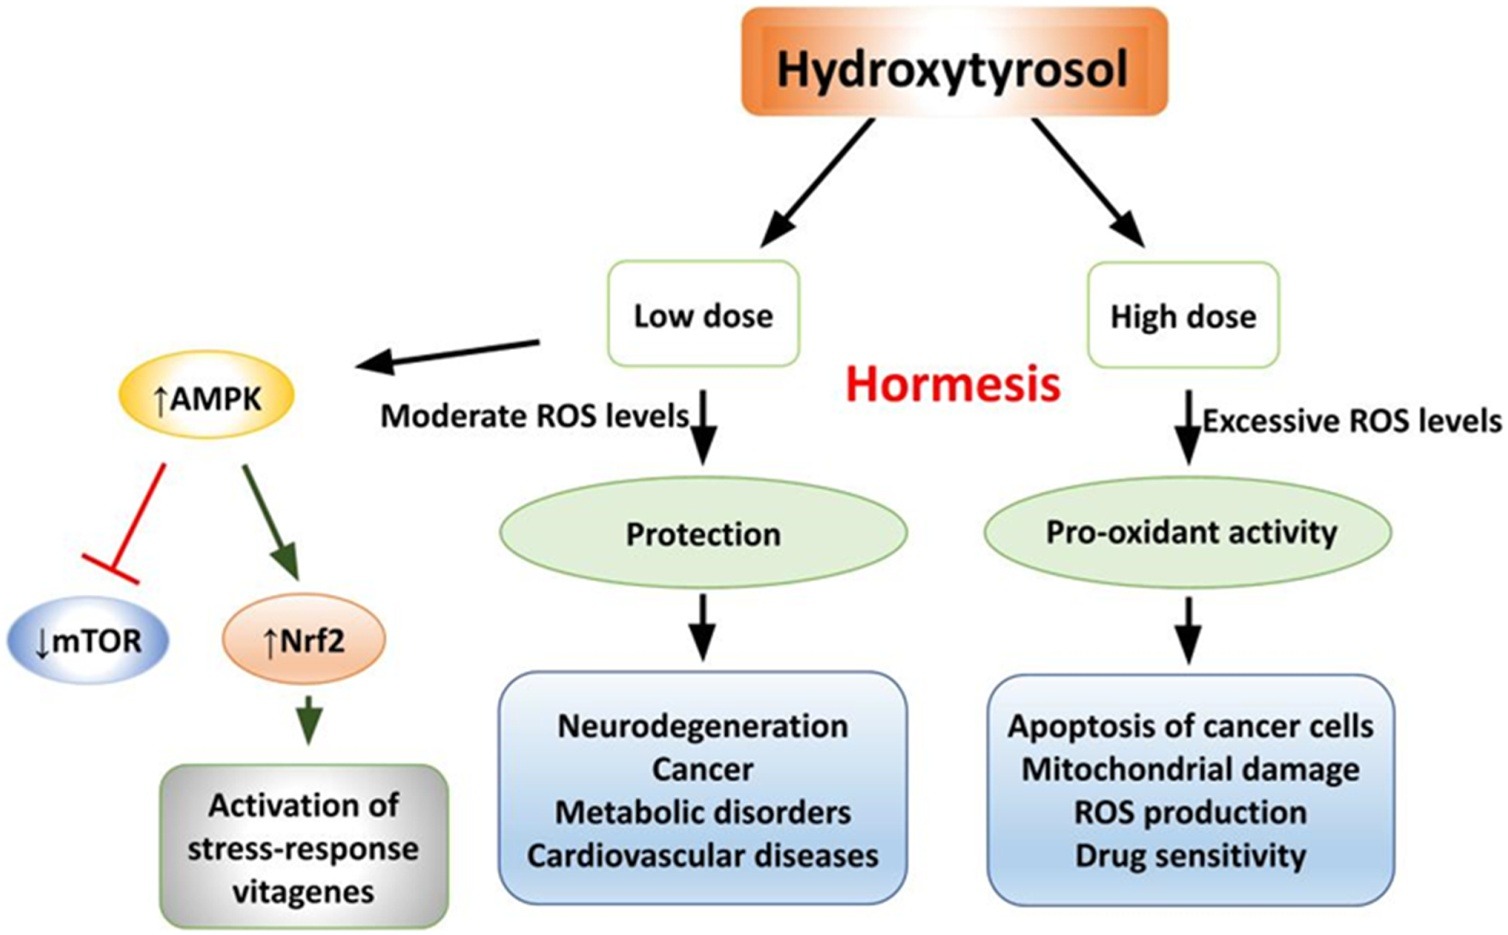 Hydroxytyrosol difference between high and low dose